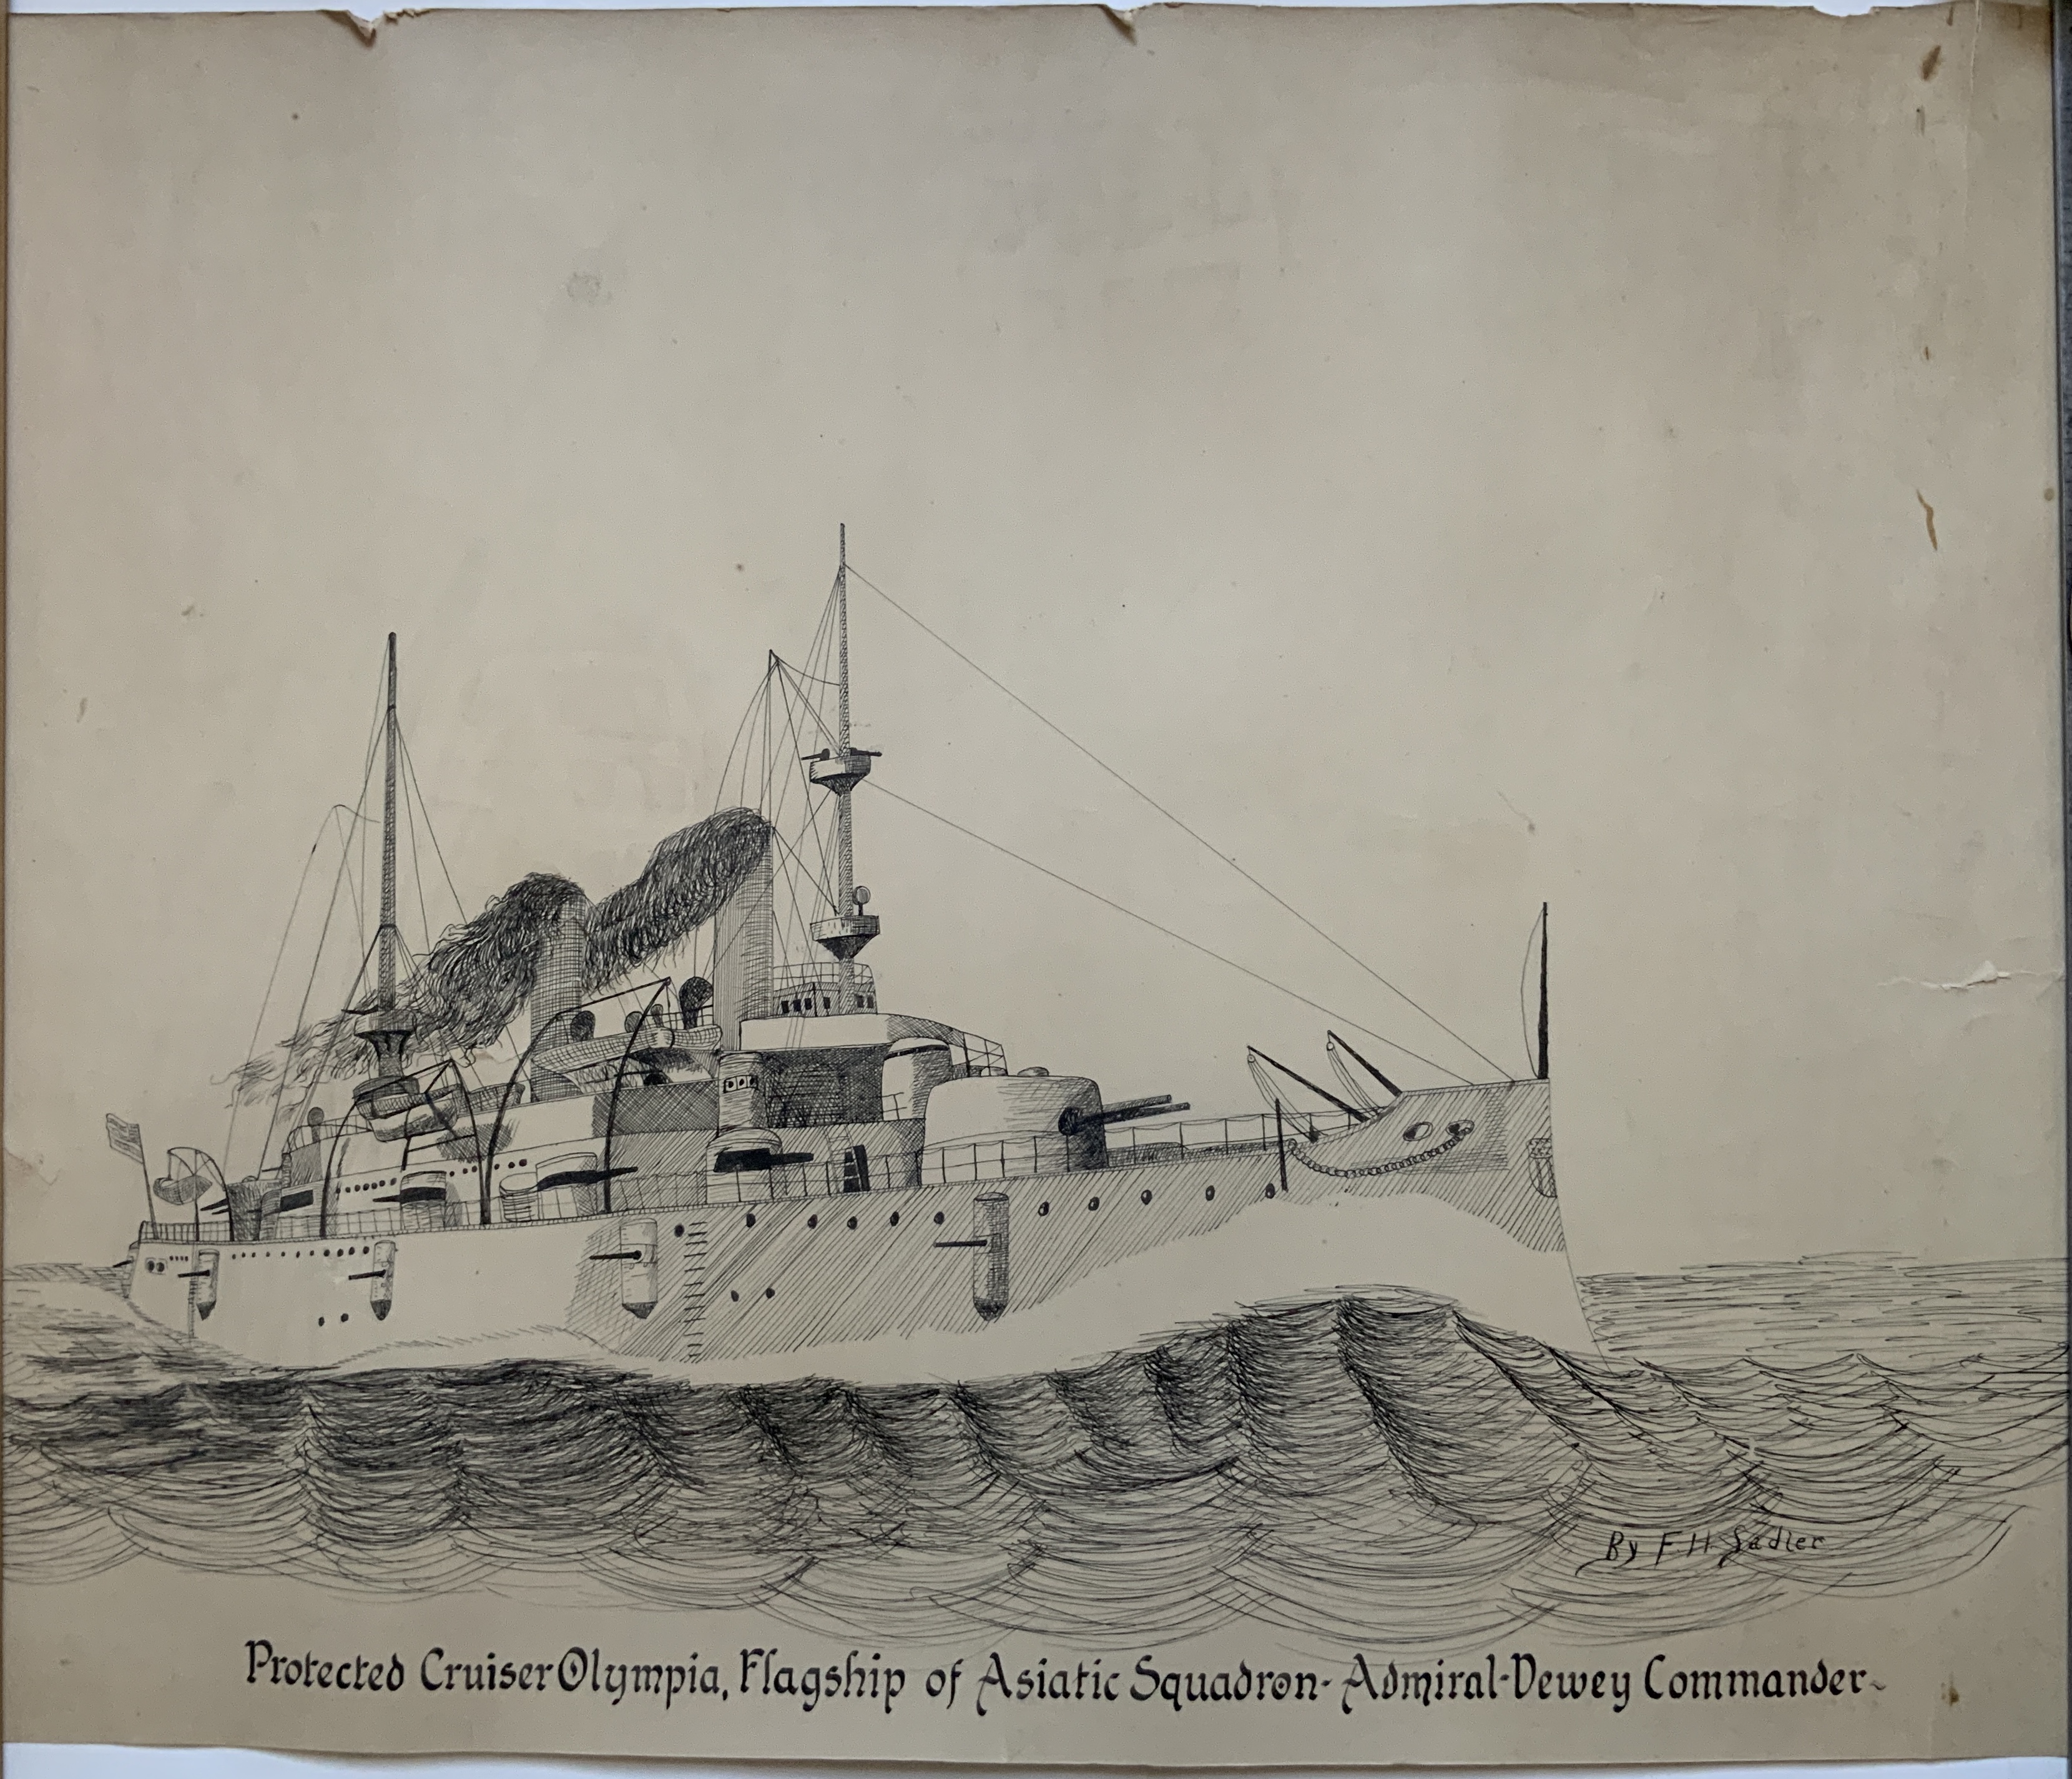 J945	ORIGINAL ARTWORK OF "PROTECTED CRUISER OLYMPIA, FLAGSHIP OF ASIATIC SQUADRON"...